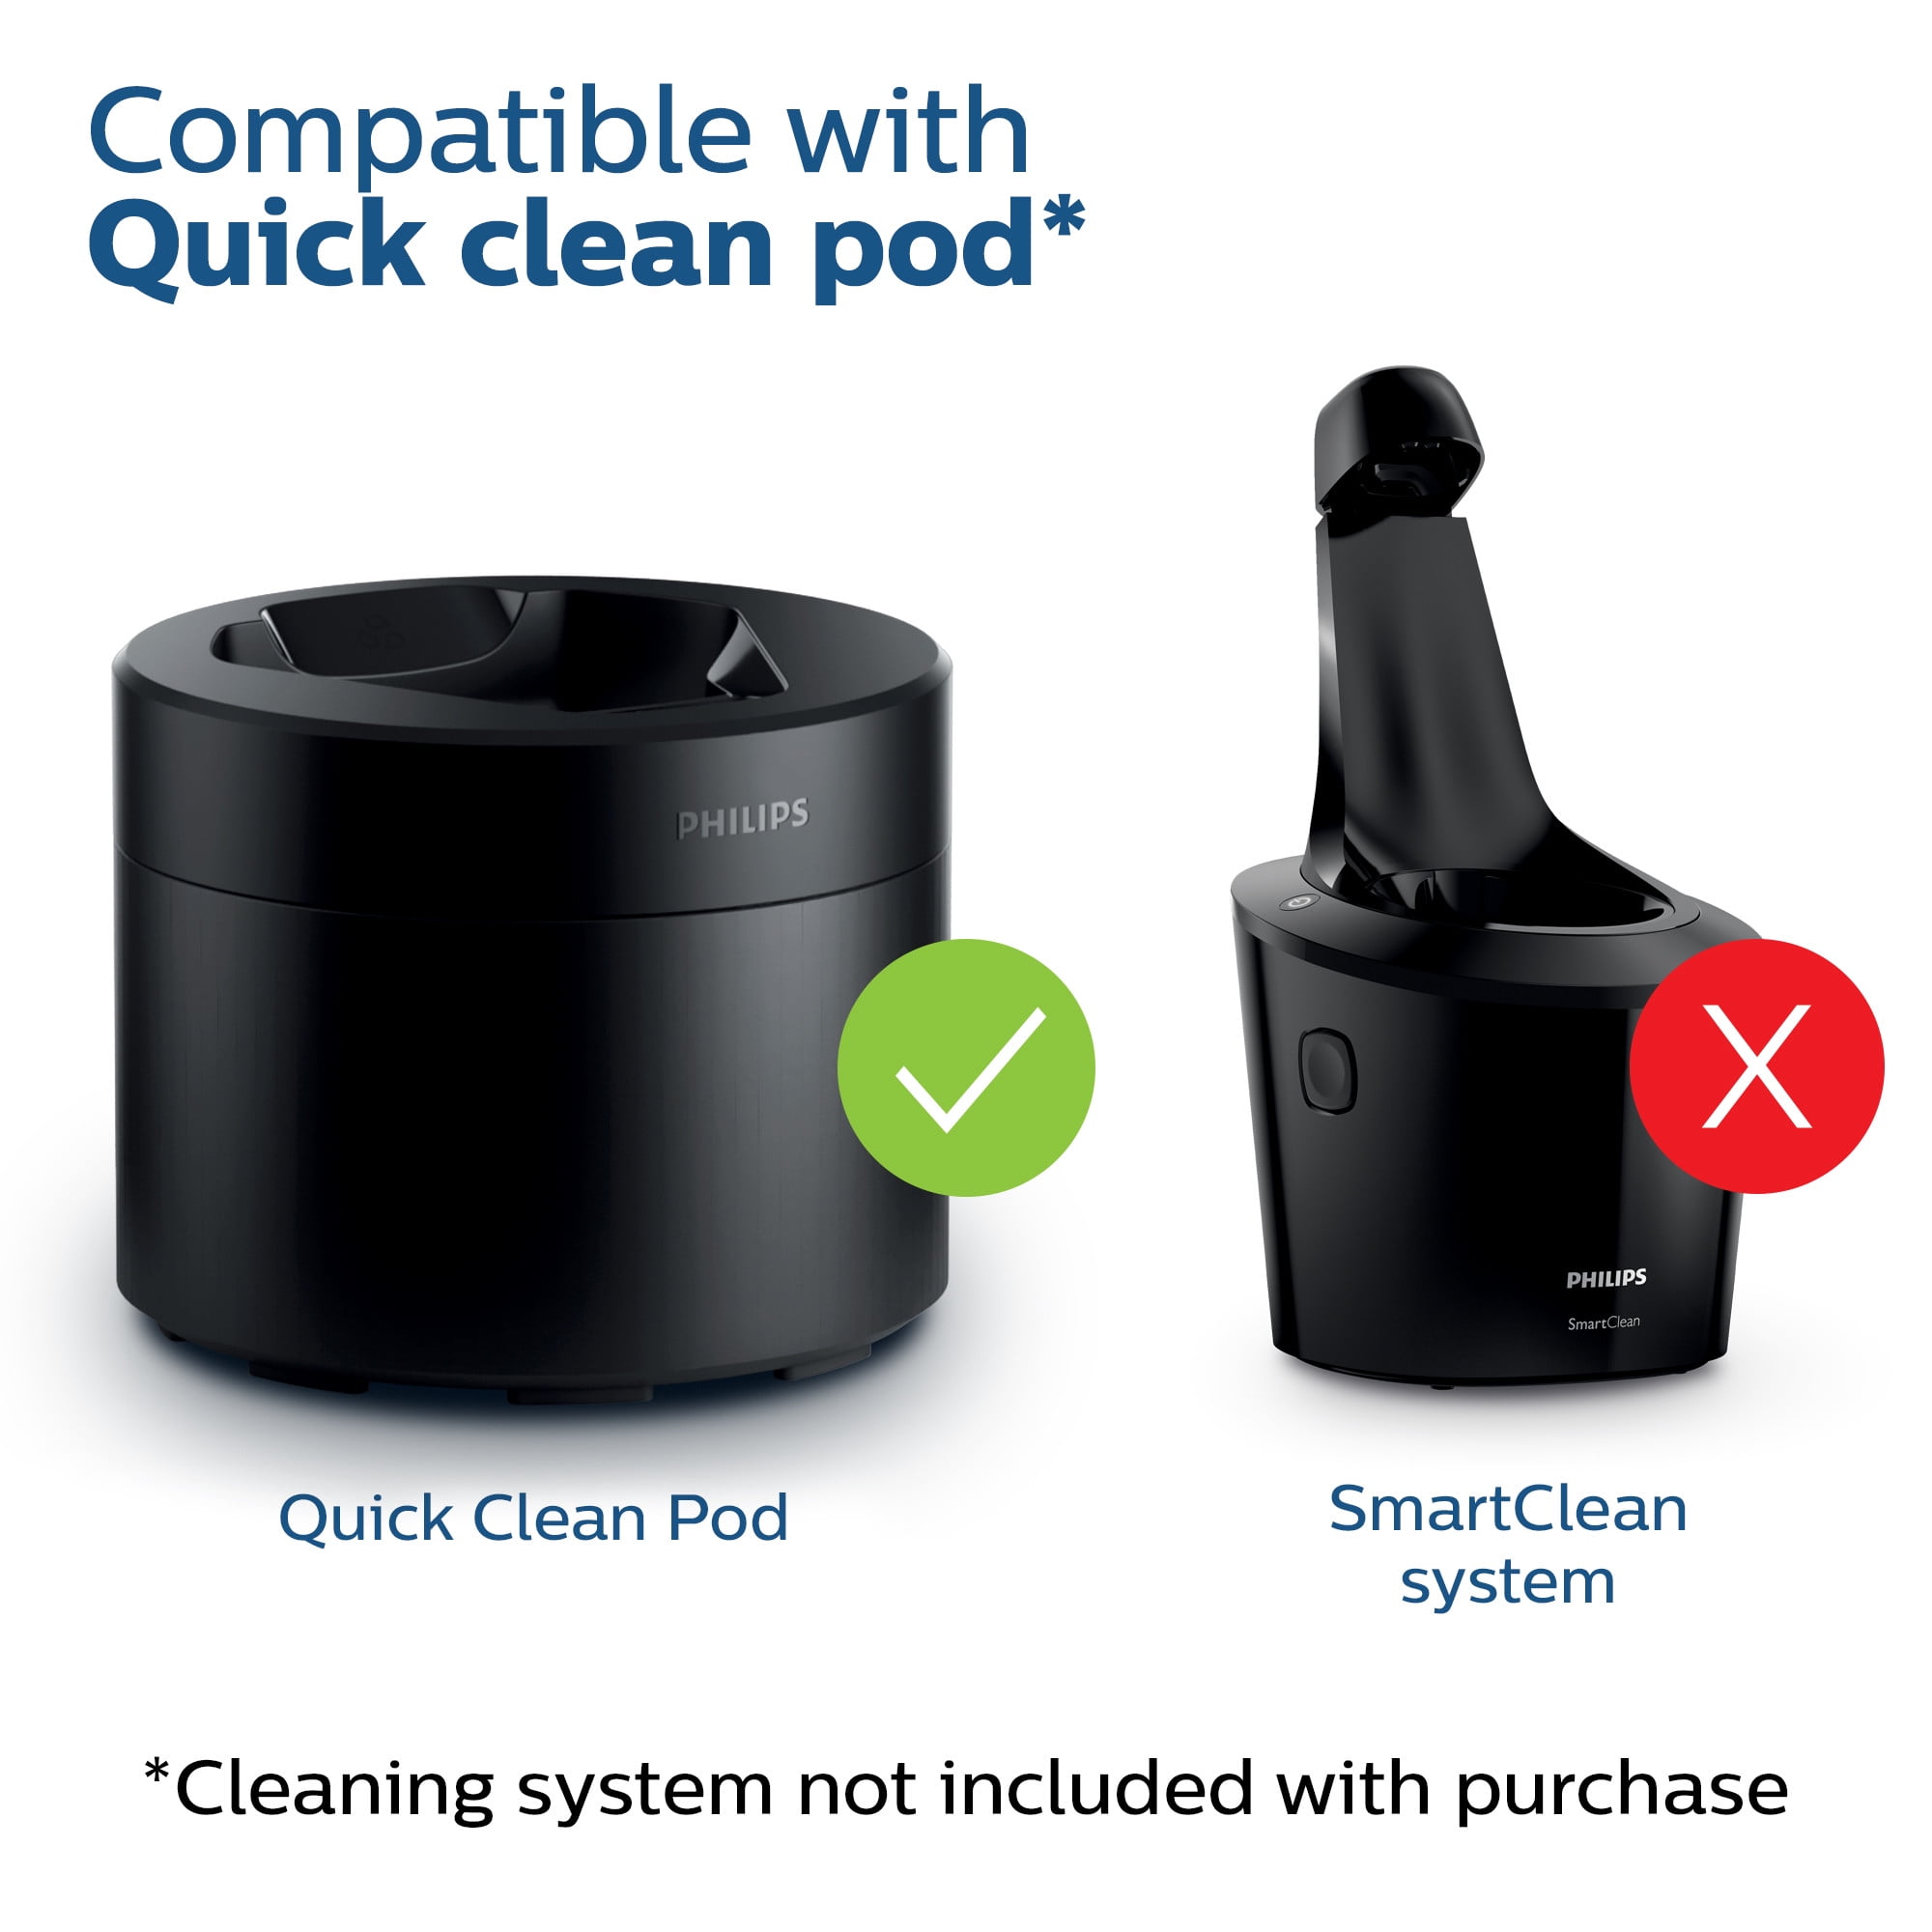 Buy Philips Quick Clean Pod Shaver Cartridges - 3 Pack